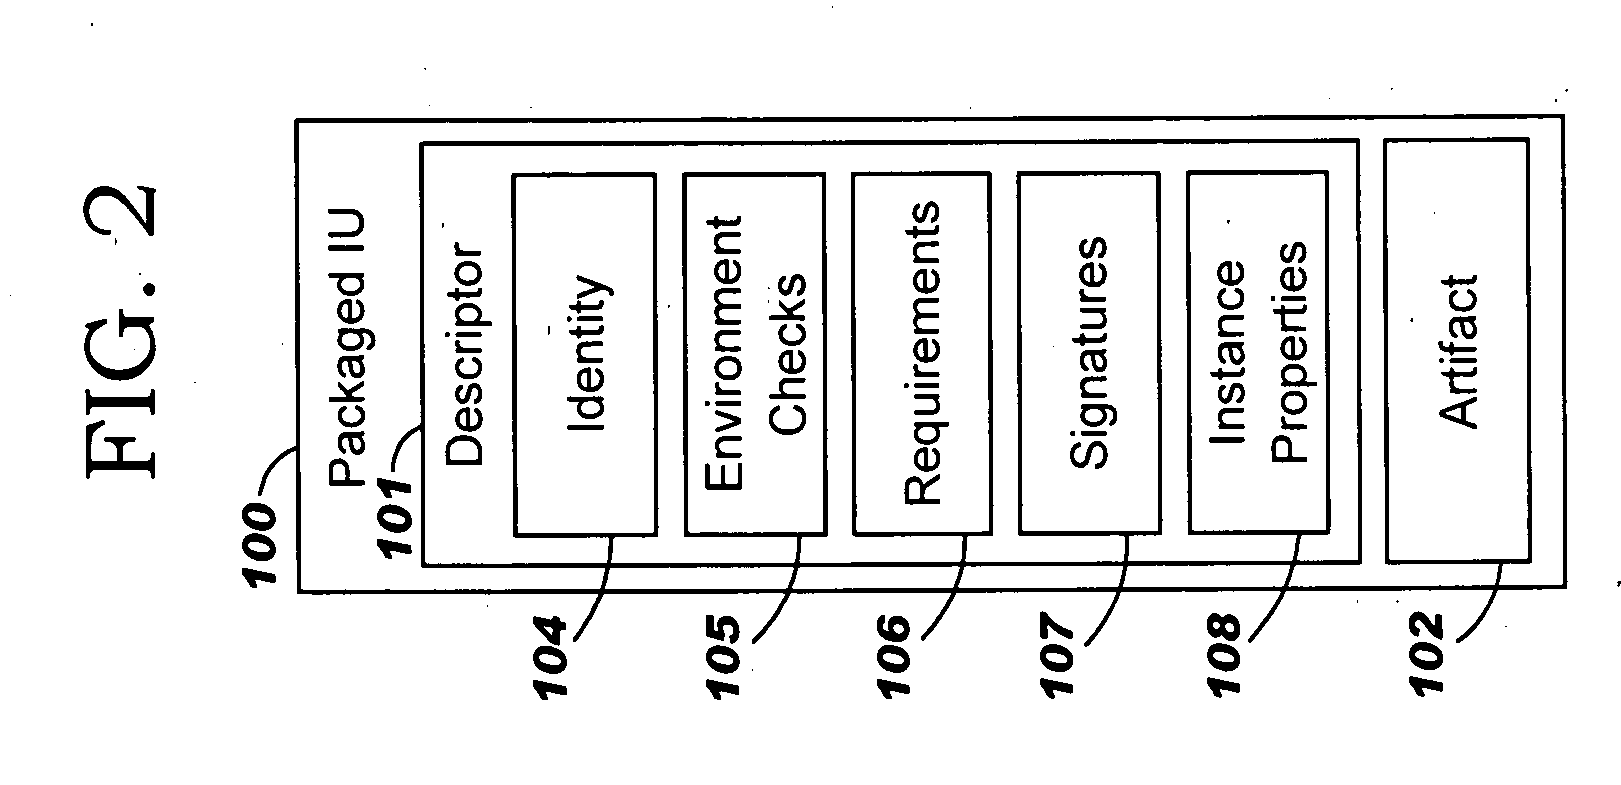 Describing Runtime Components of a Solution for a Computer System